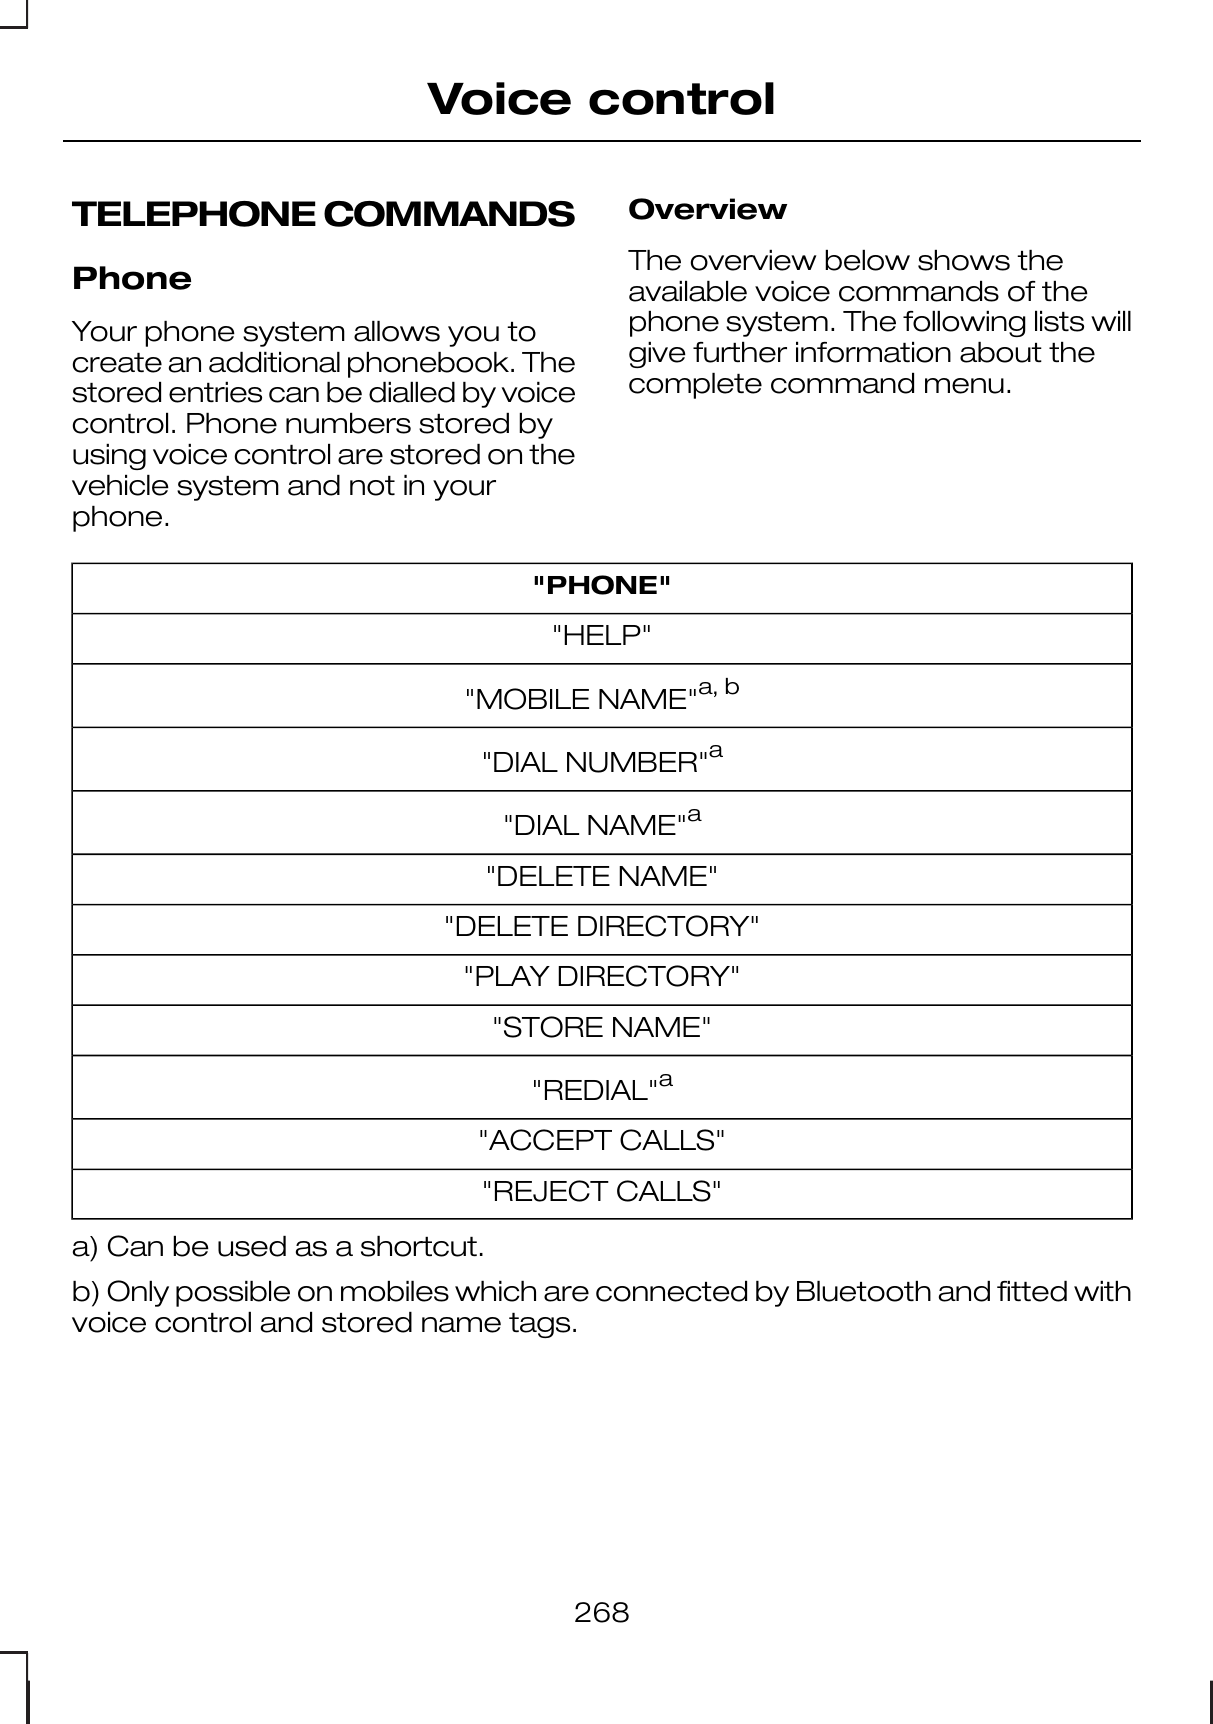 TELEPHONE COMMANDSPhoneYour phone system allows you tocreate an additional phonebook. Thestored entries can be dialled by voicecontrol. Phone numbers stored byusing voice control are stored on thevehicle system and not in yourphone.OverviewThe overview below shows theavailable voice commands of thephone system. The following lists willgive further information about thecomplete command menu.&quot;PHONE&quot;&quot;HELP&quot;&quot;MOBILE NAME&quot;a, b&quot;DIAL NUMBER&quot;a&quot;DIAL NAME&quot;a&quot;DELETE NAME&quot;&quot;DELETE DIRECTORY&quot;&quot;PLAY DIRECTORY&quot;&quot;STORE NAME&quot;&quot;REDIAL&quot;a&quot;ACCEPT CALLS&quot;&quot;REJECT CALLS&quot;a) Can be used as a shortcut.b) Only possible on mobiles which are connected by Bluetooth and fitted withvoice control and stored name tags.268Voice control